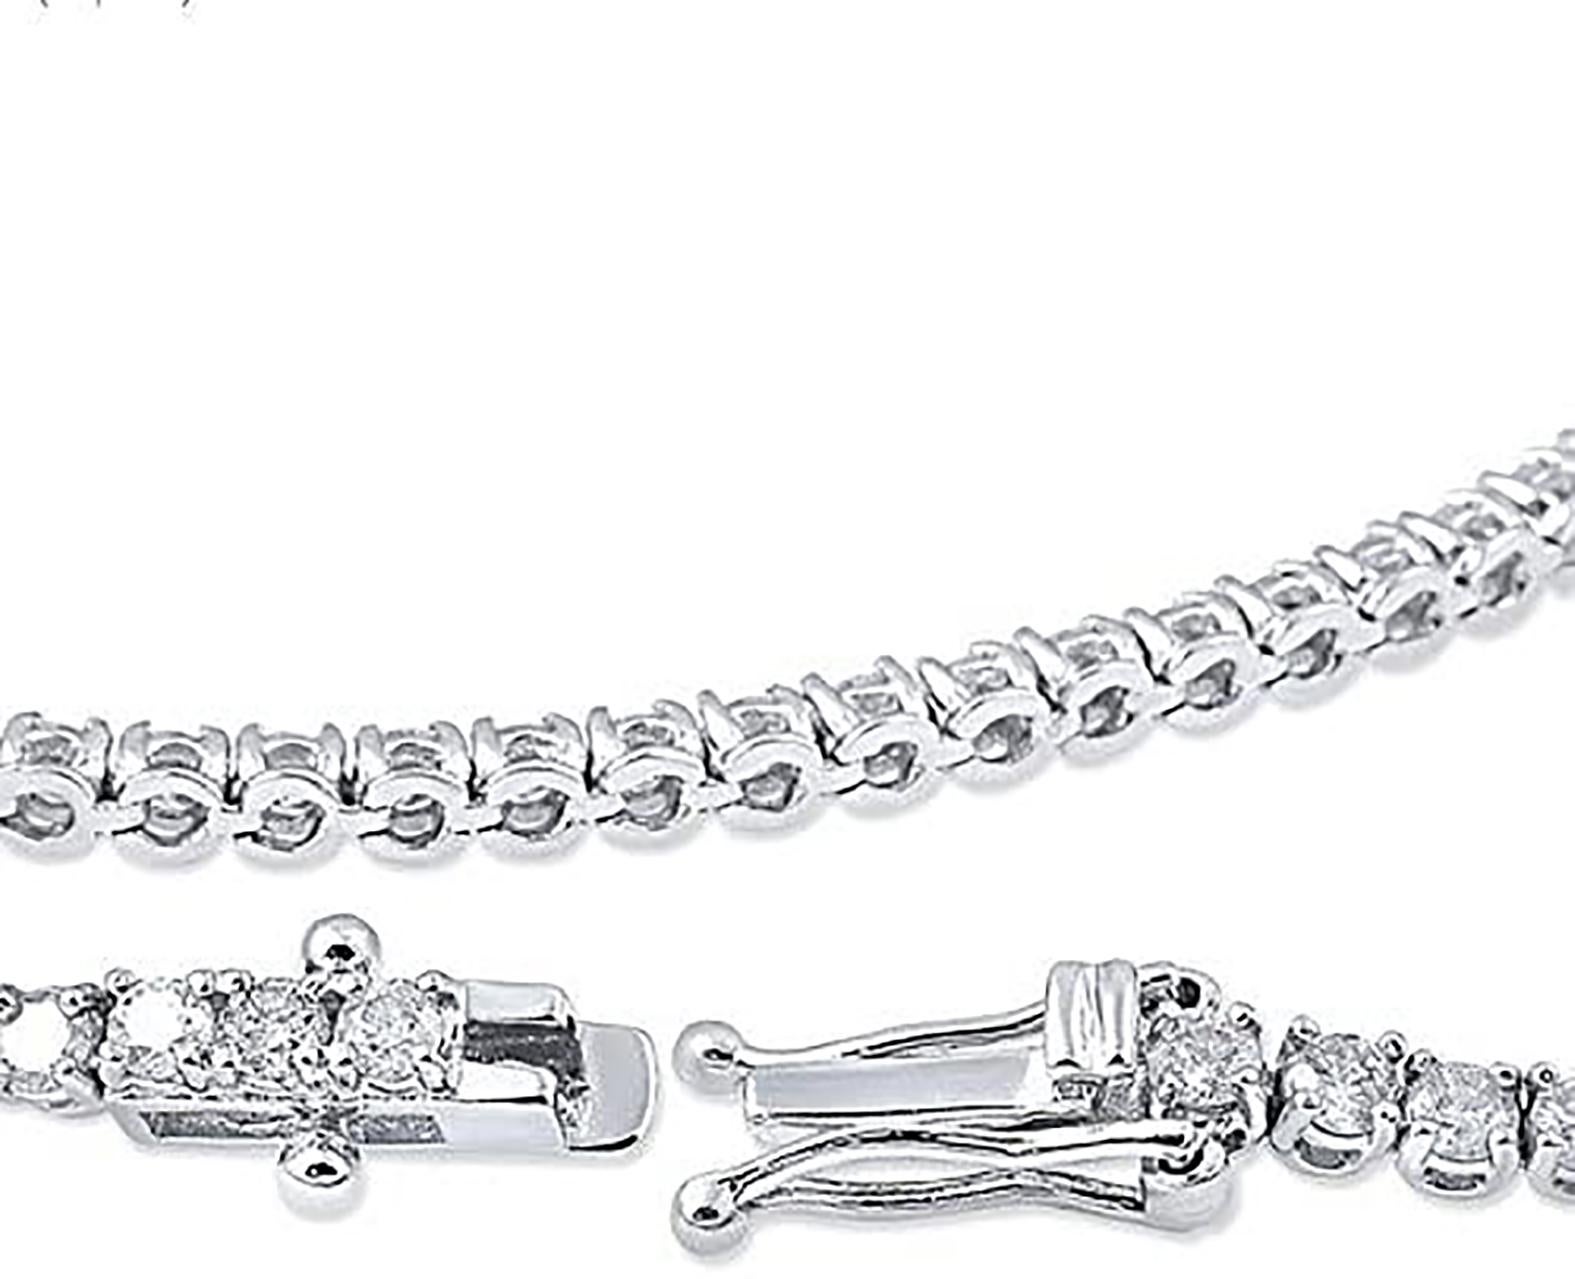 Indulge in the ultimate expression of luxury and sophistication with this stunning diamond tennis bracelet. Crafted from premium 14K white gold, this bracelet features a total of 3 carats of G+ color SI+ clarity diamonds that exude unmatched